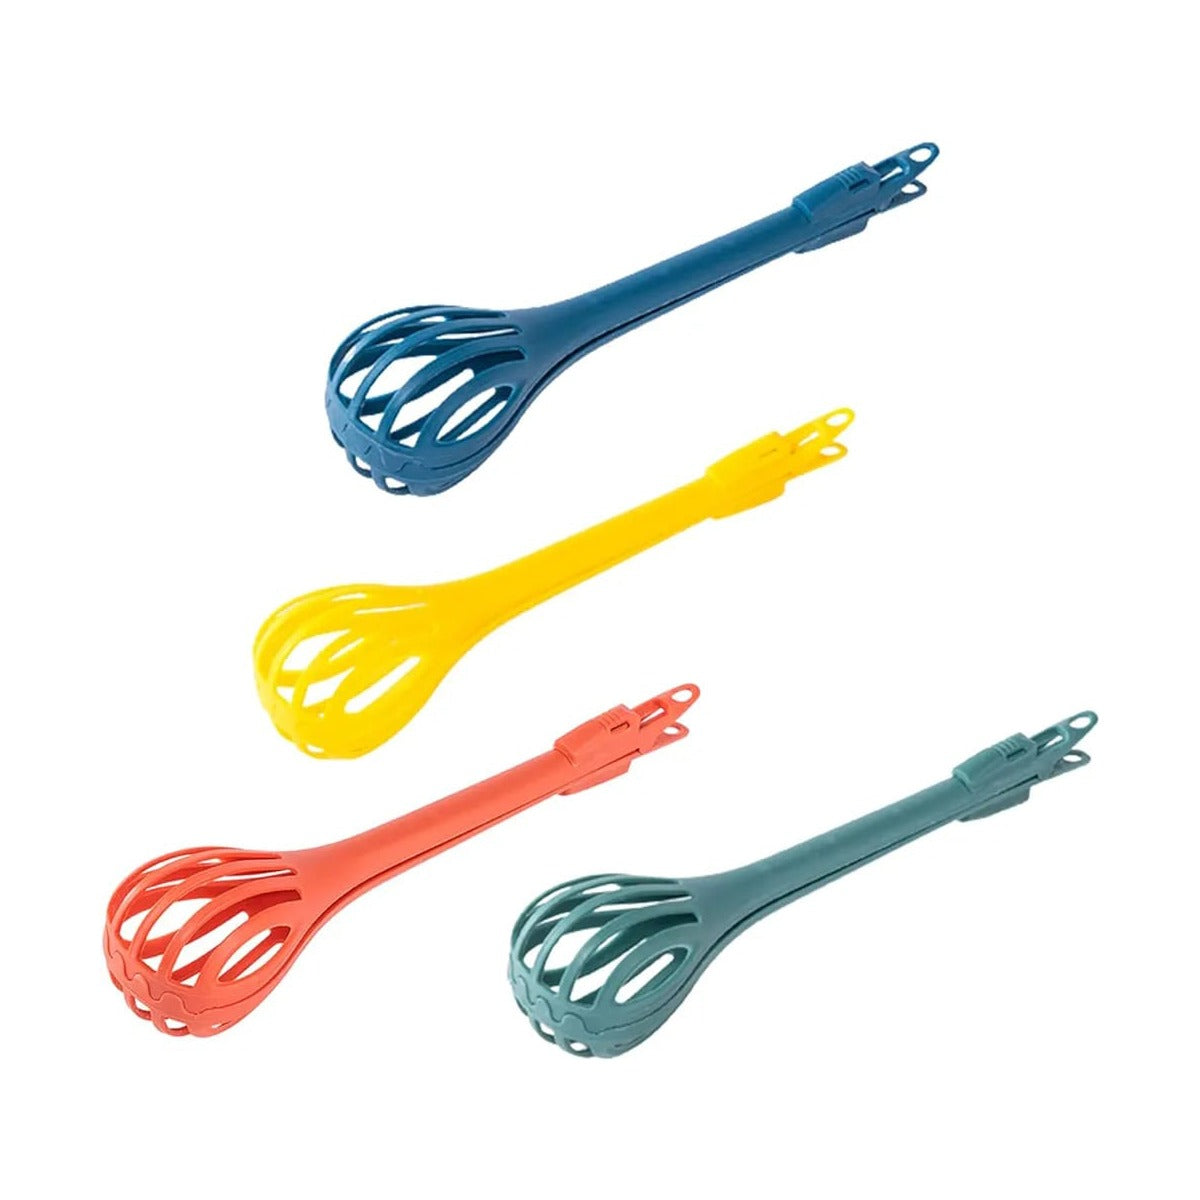 Multi- purpose Manual Kitchen Whisk in 4 Colors.